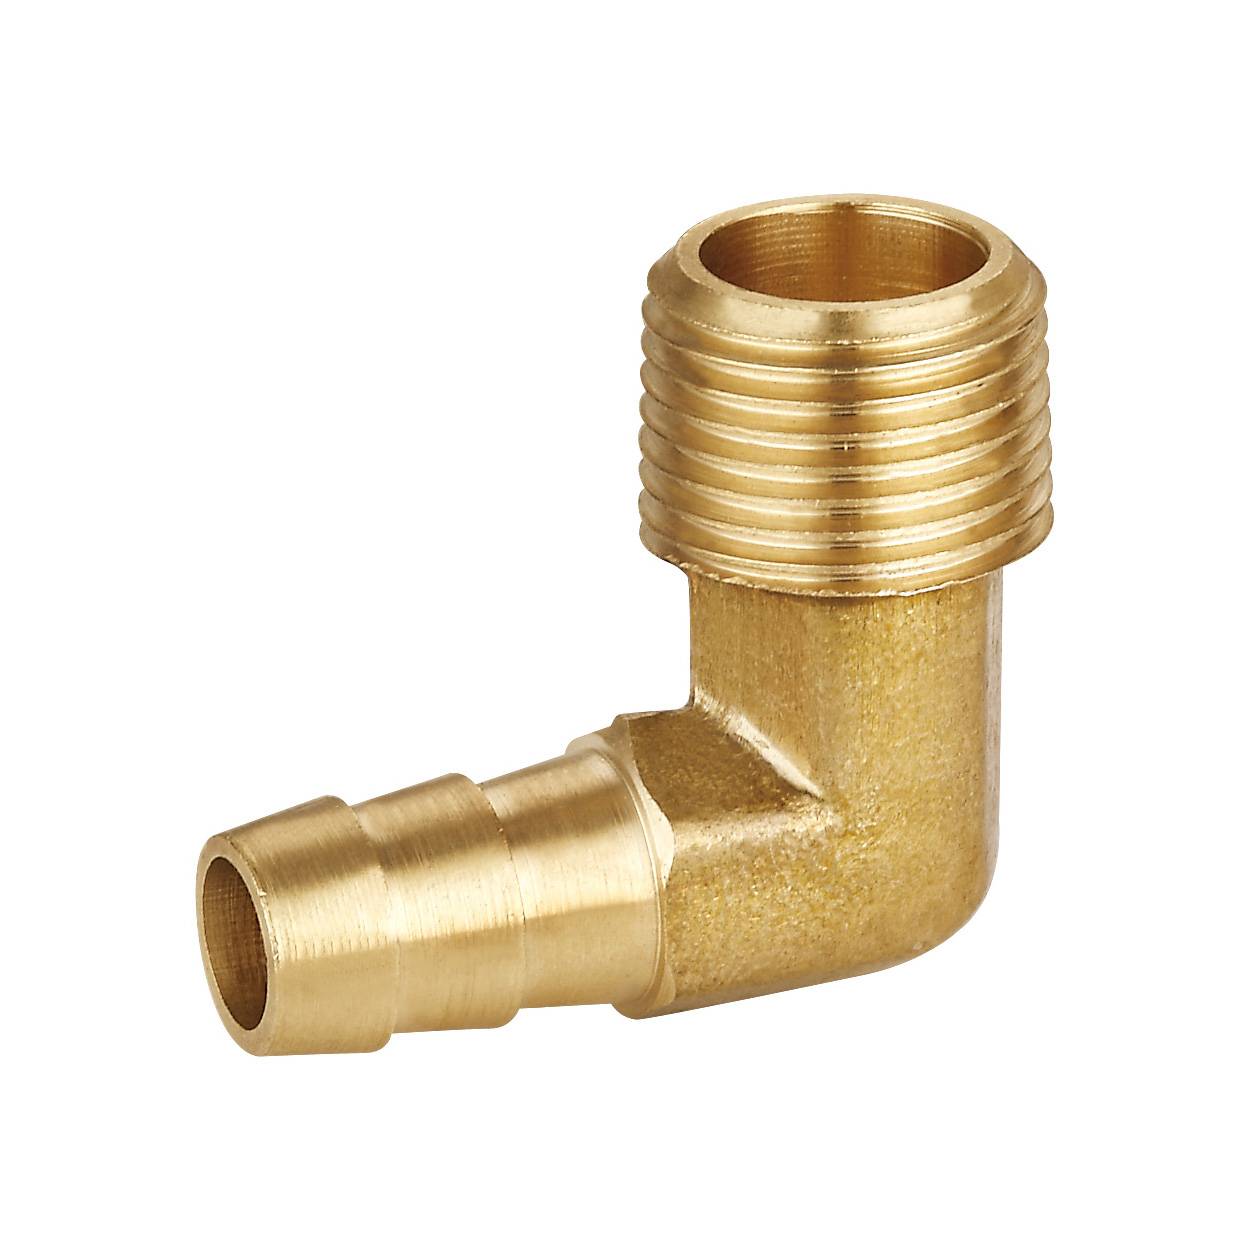 Brass Hose Barb Fitting Featured Image